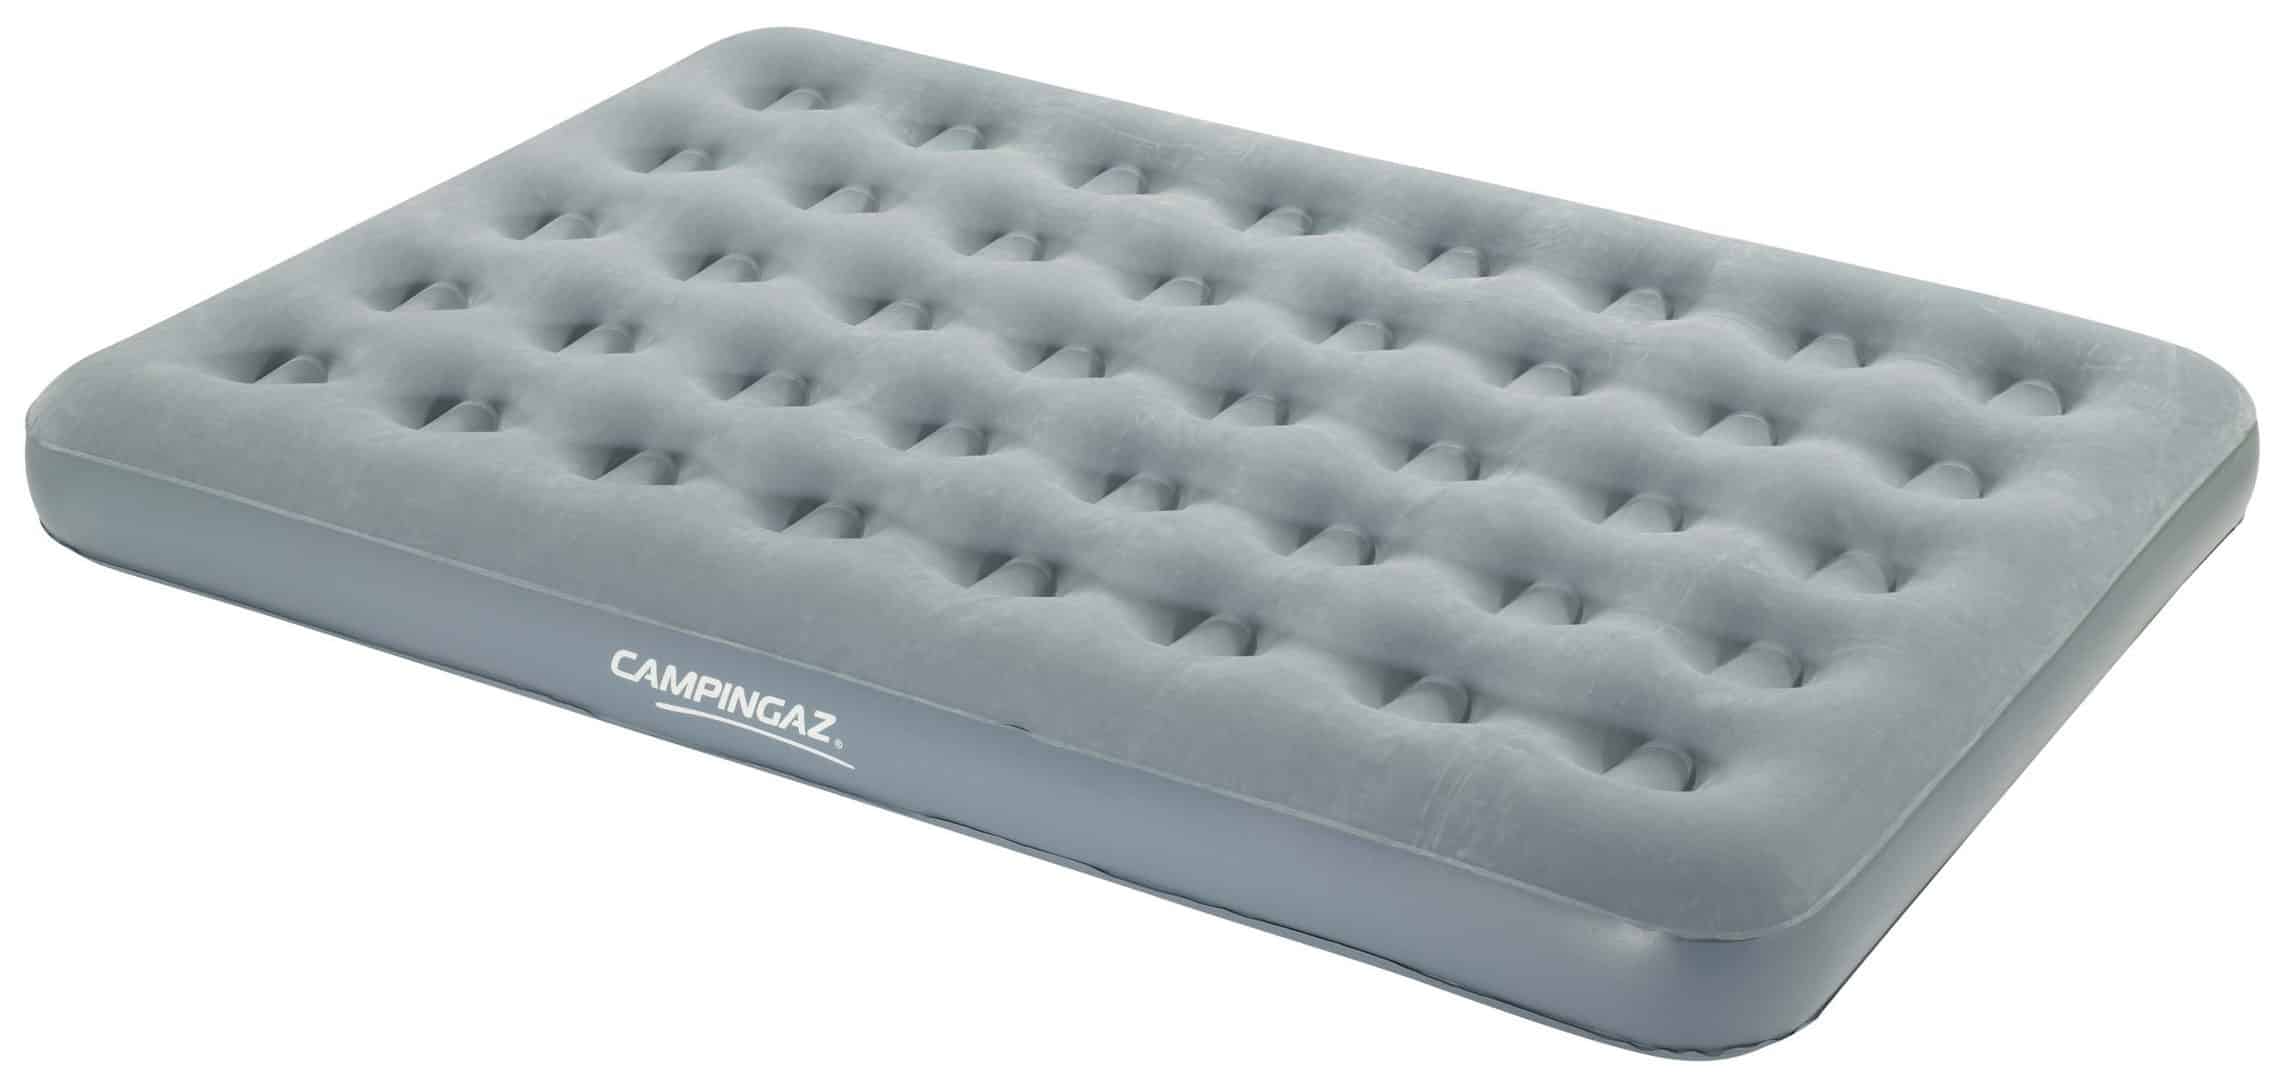 Campingaz Airbed Quickbed Double Camping Bed